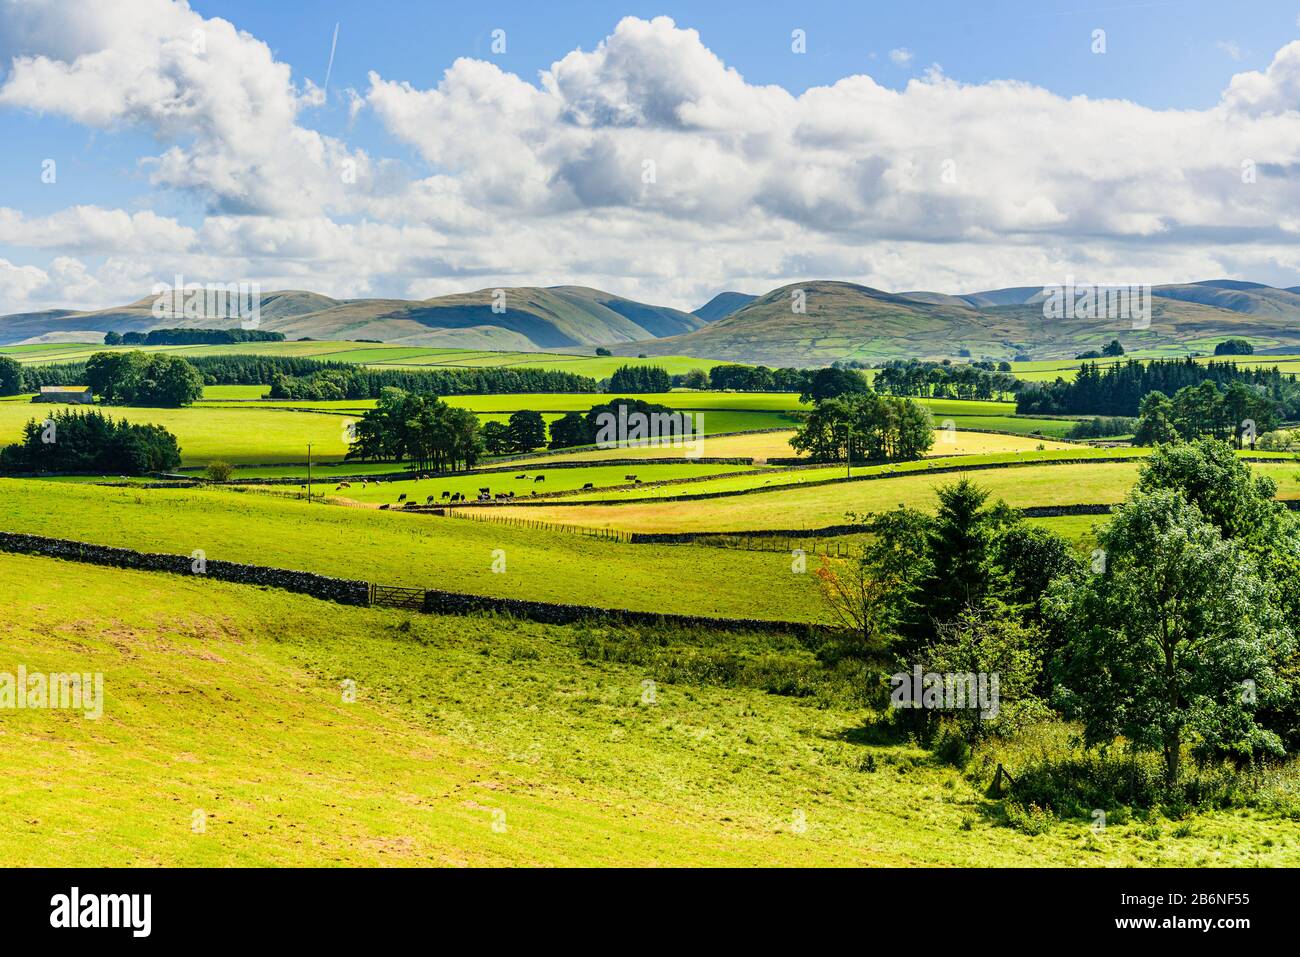 The Howgill Fells from near Orton in the Yorkshire Dales National Park Stock Photo